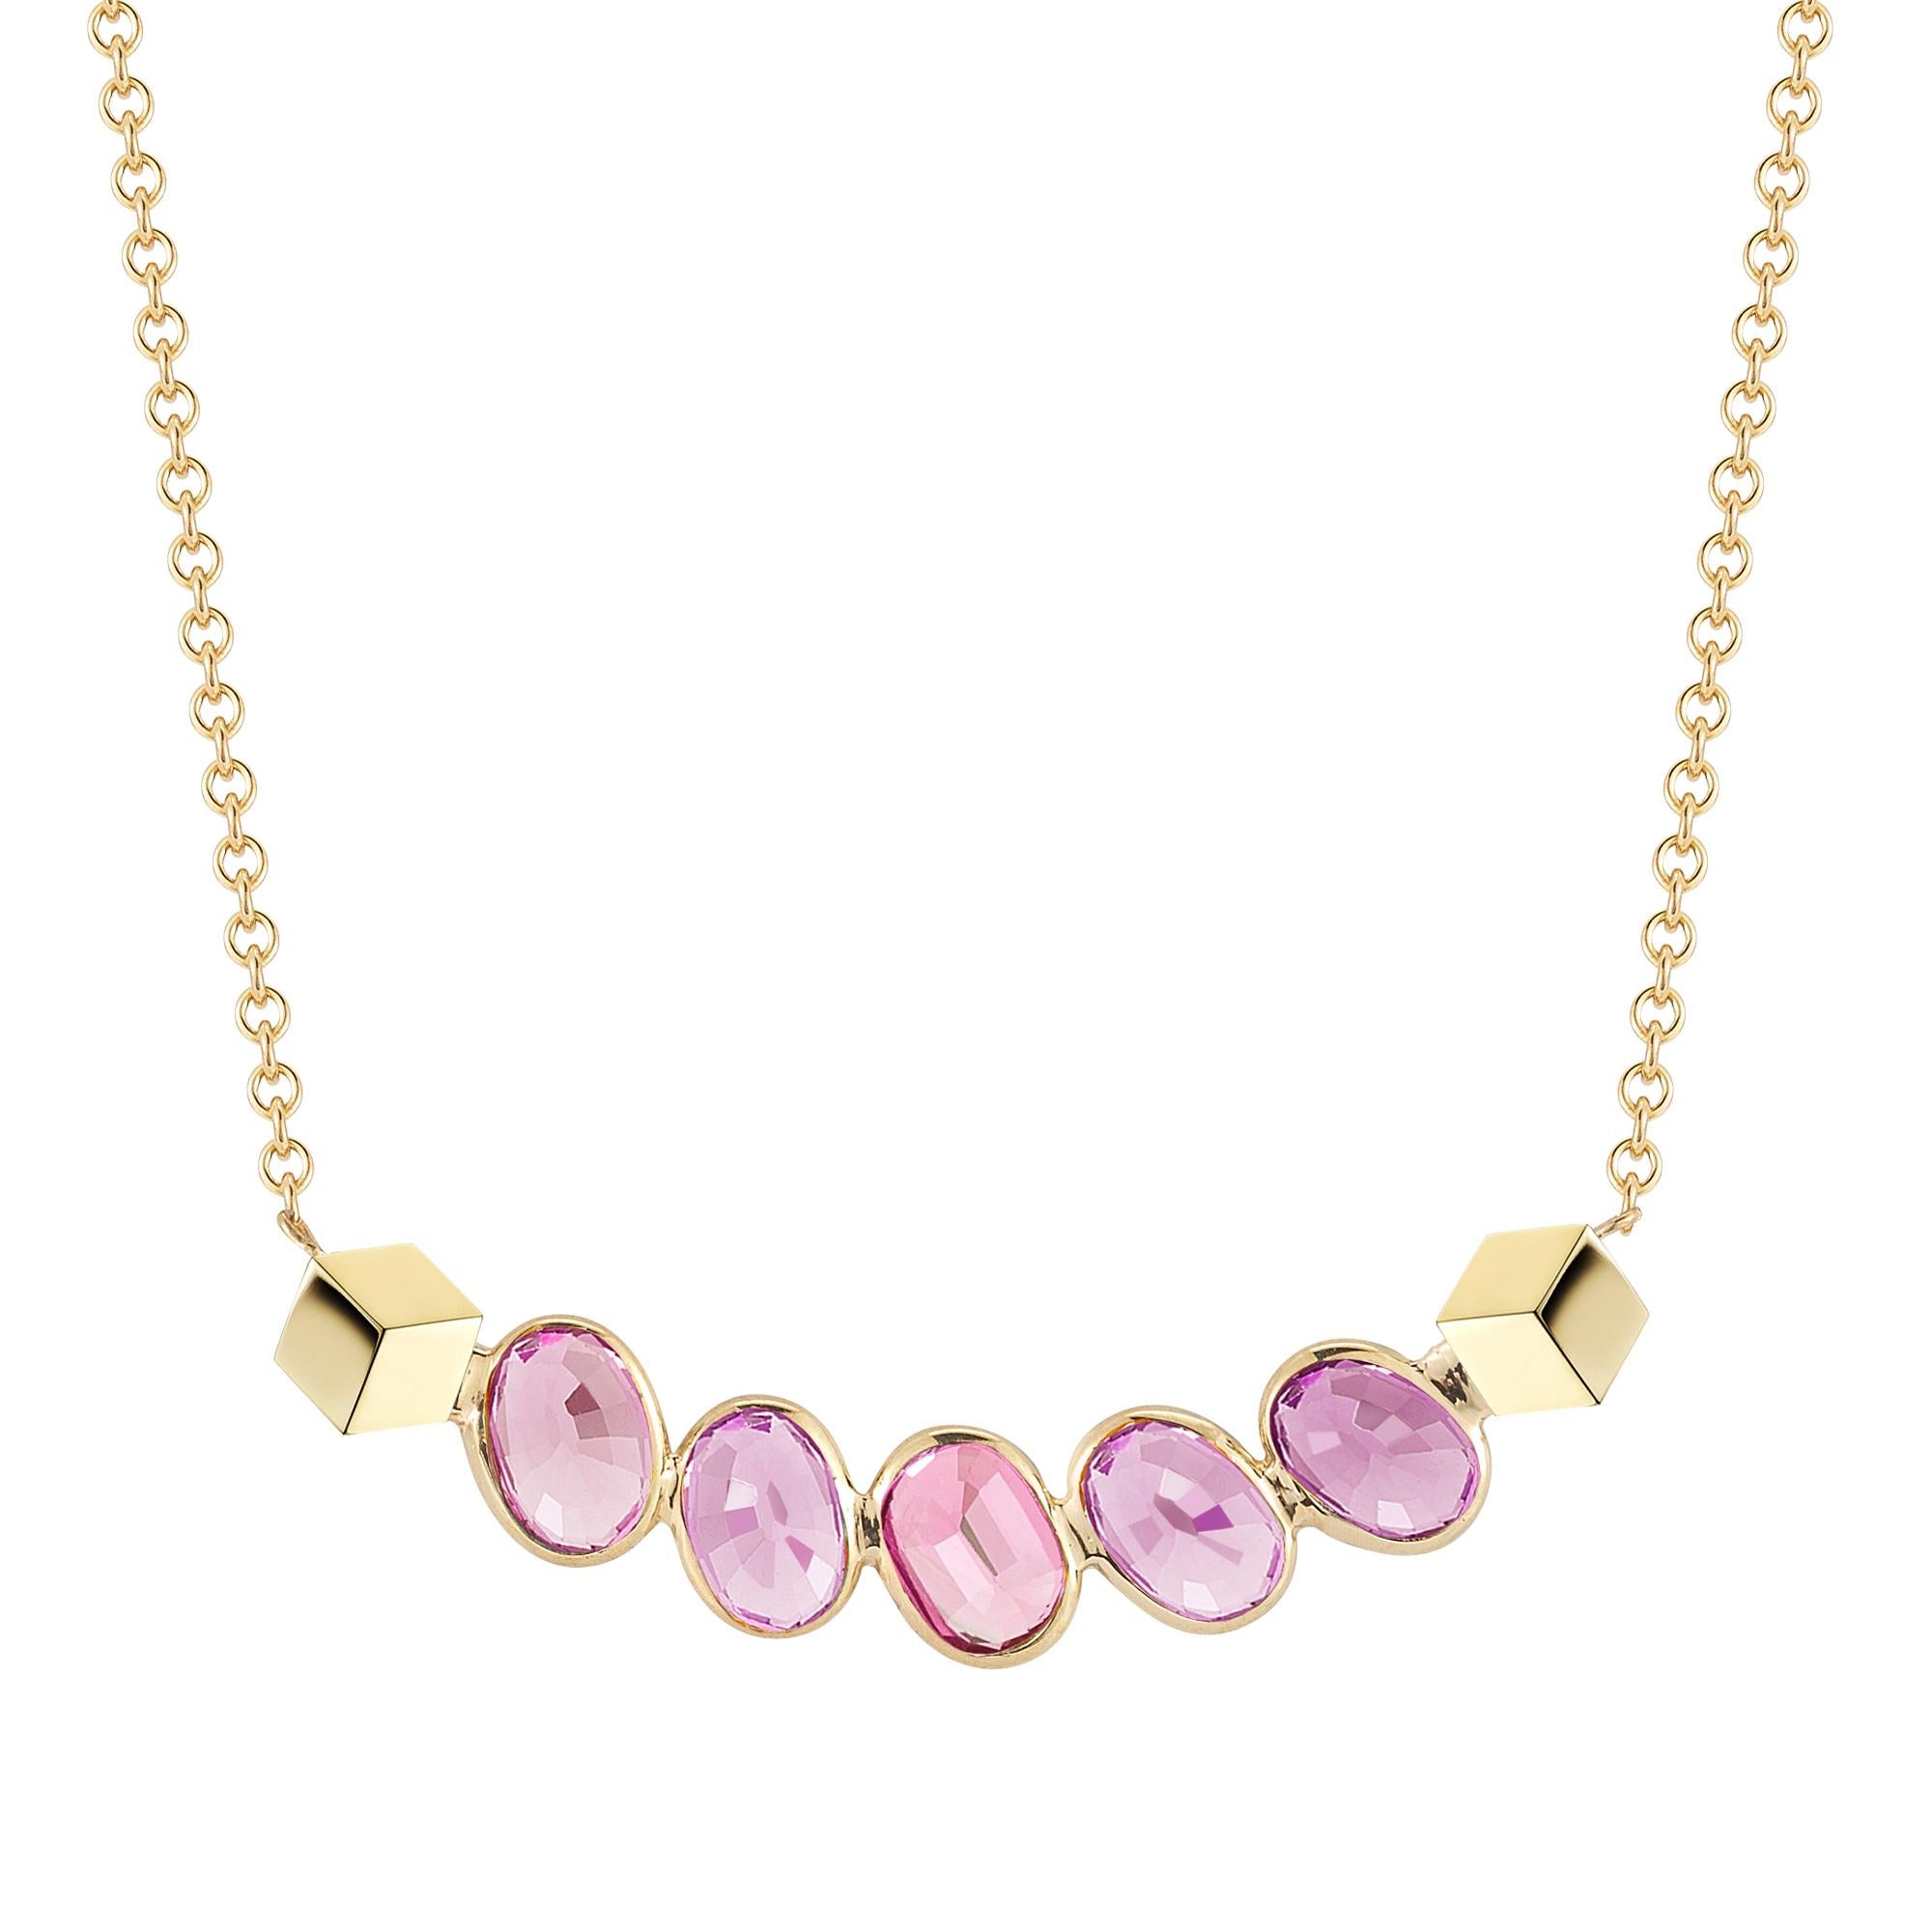 Paolo Costagli 18kt Yellow Gold Pink Sapphire, 2.91 Carat Ombré Pendant Necklace im Angebot